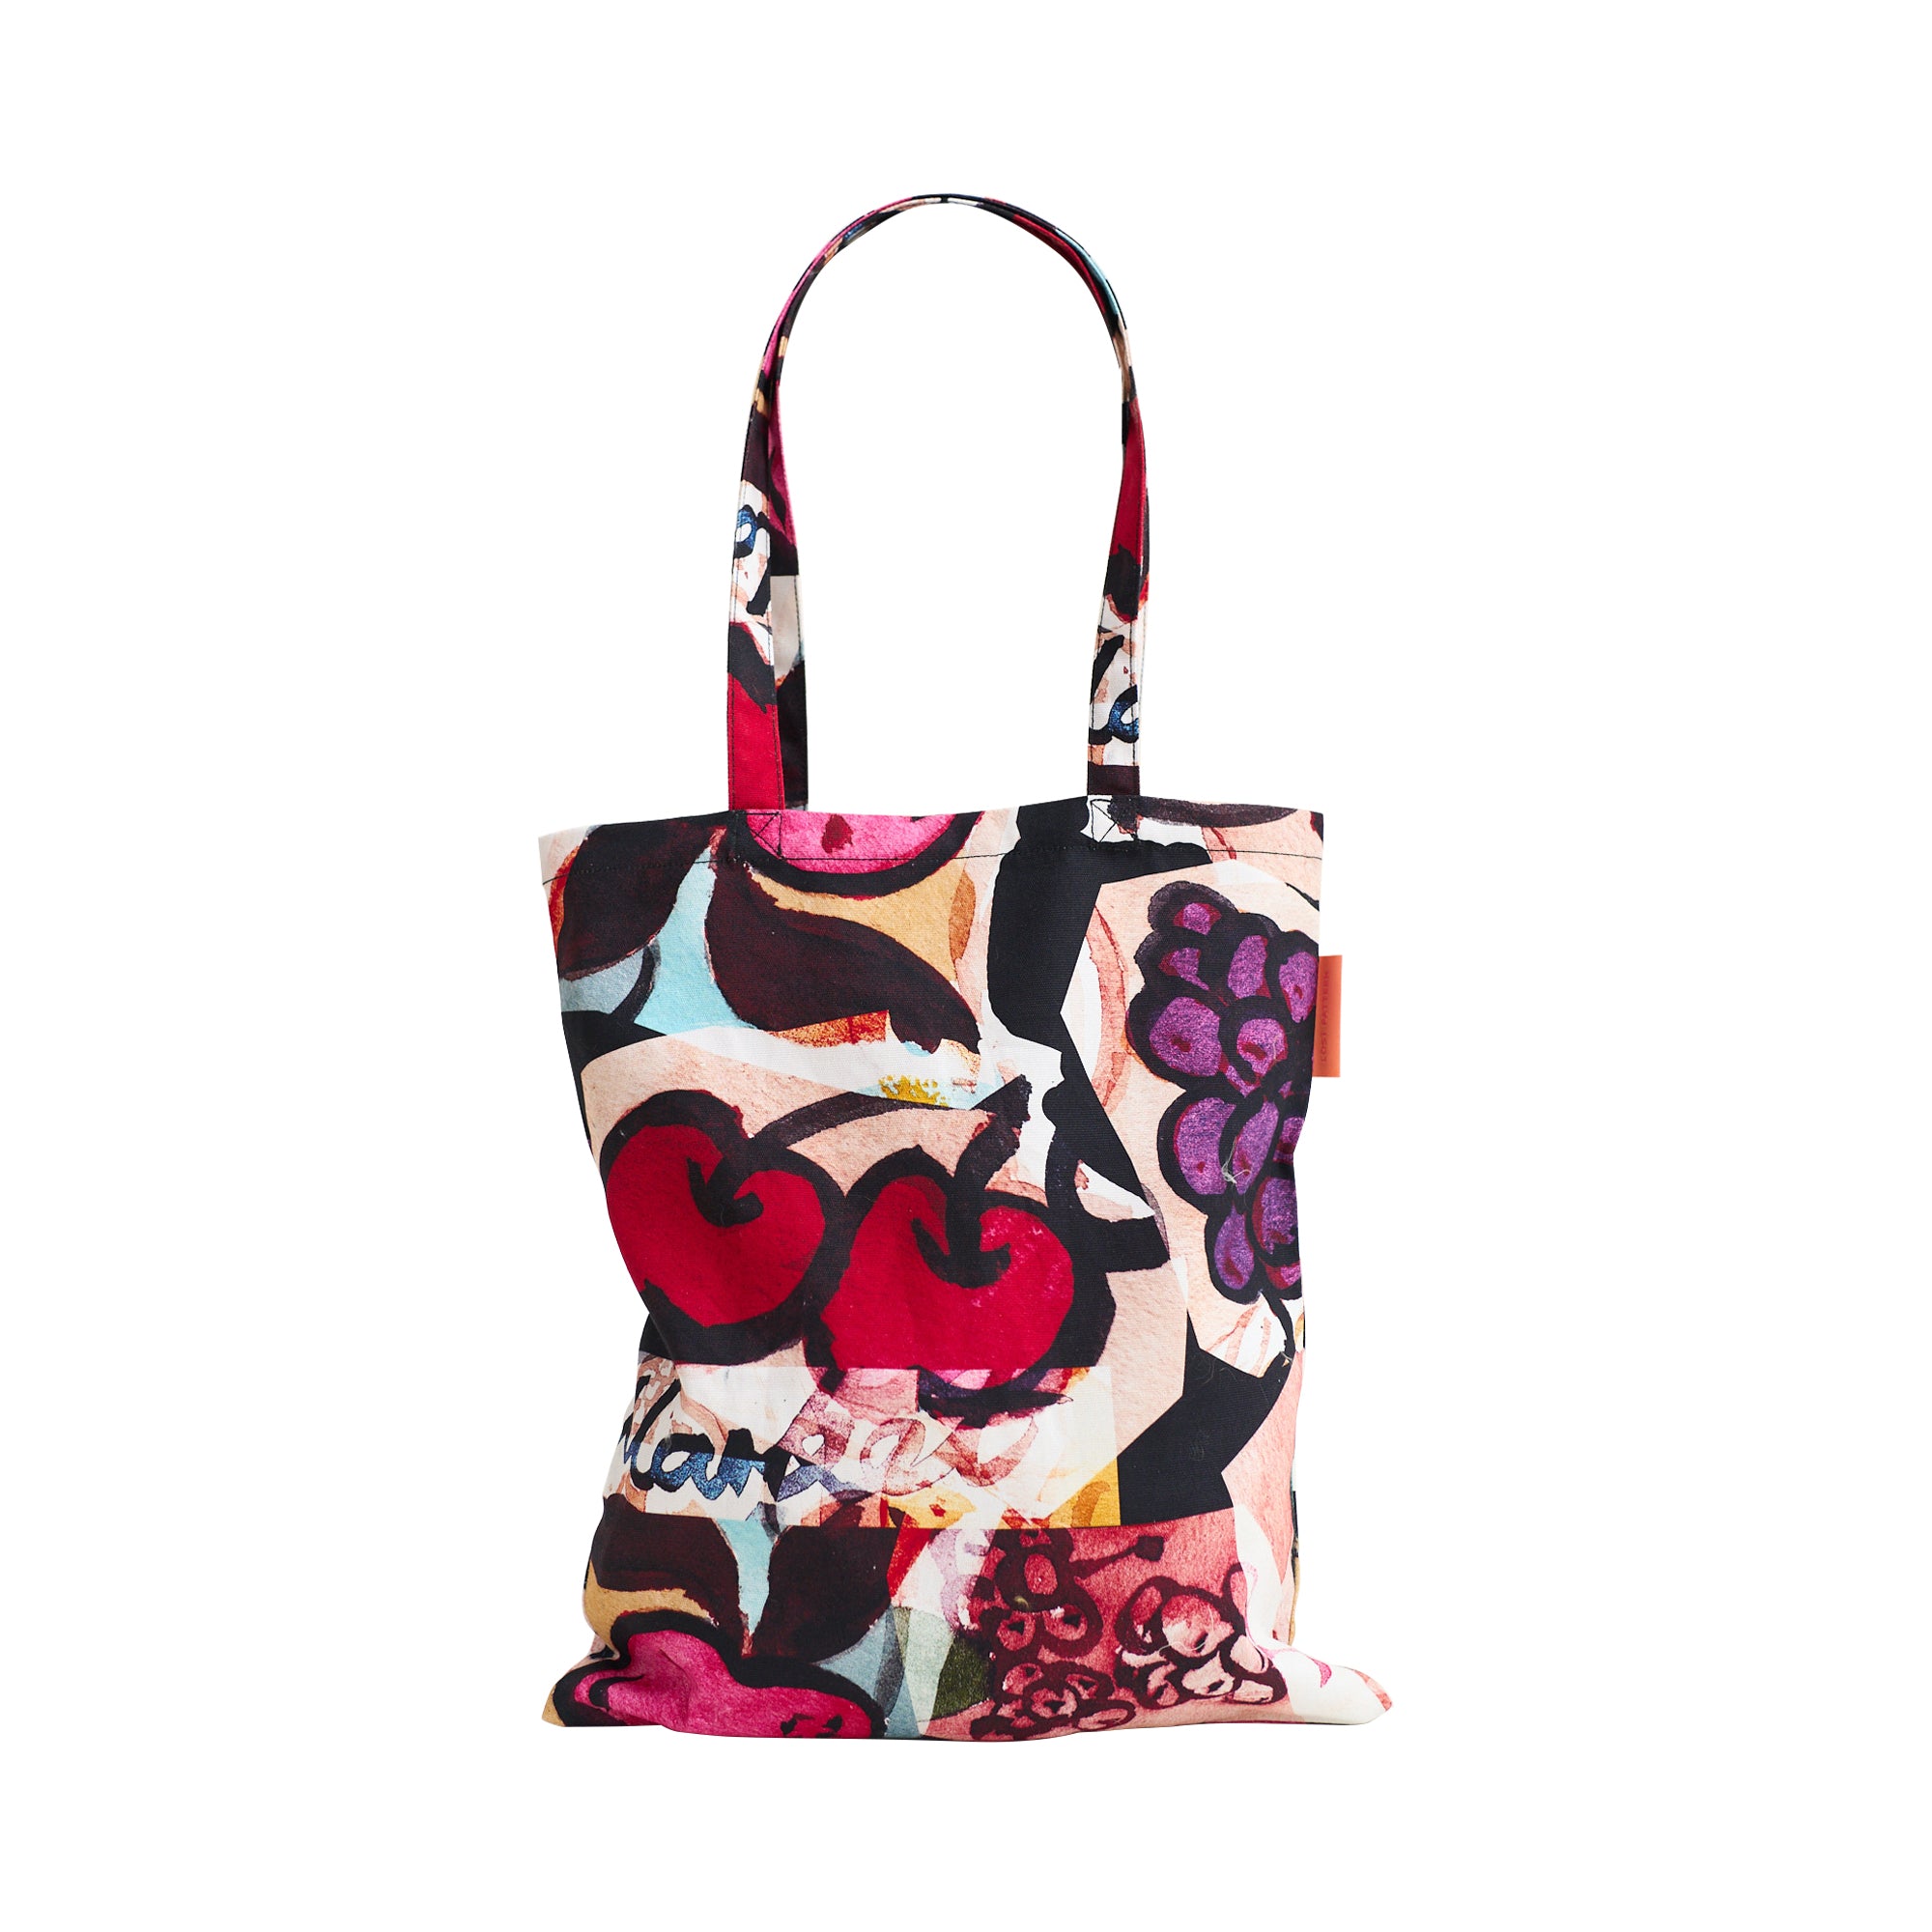 "Lost Cherries" Cotton Tote Bag - Cherry Red - LOST PATTERN Tote Bag